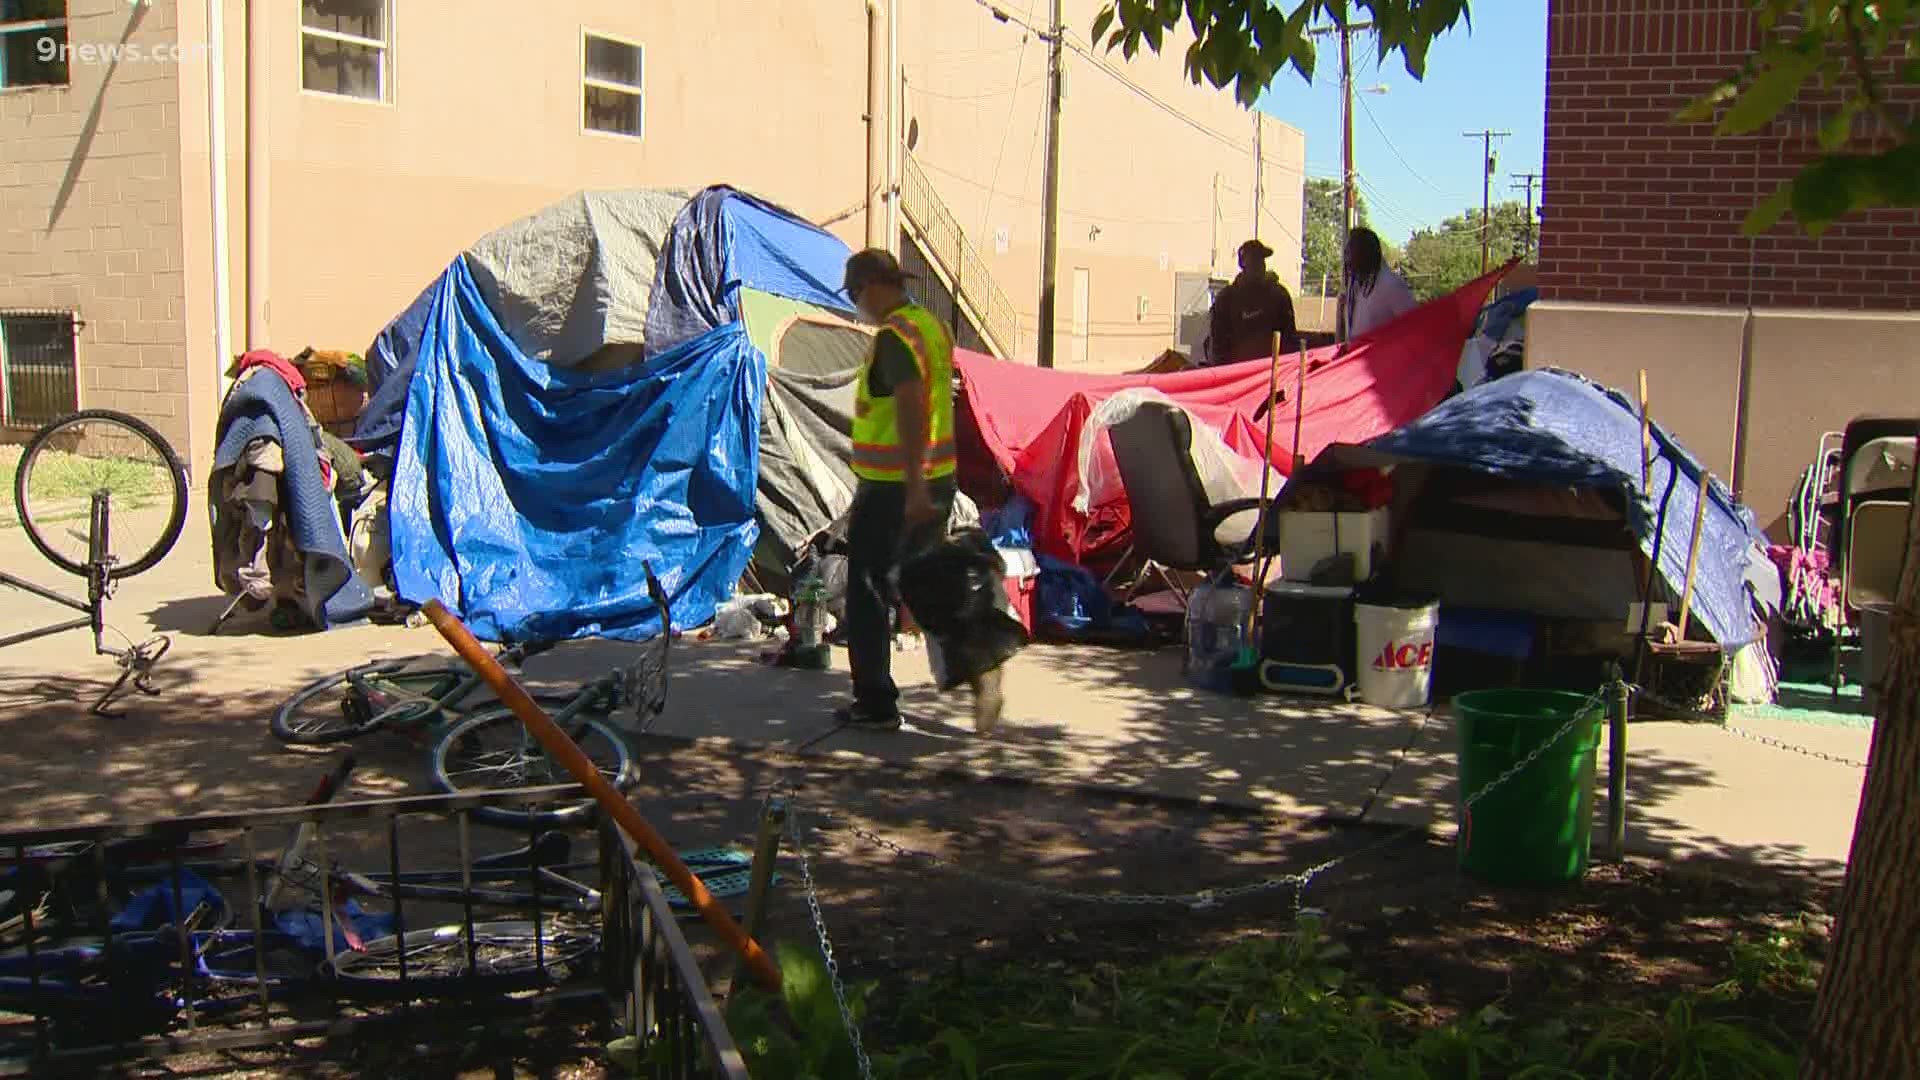 The Five Points housing outre ach team supports a city-sanctioned campsite in their neighborhood.